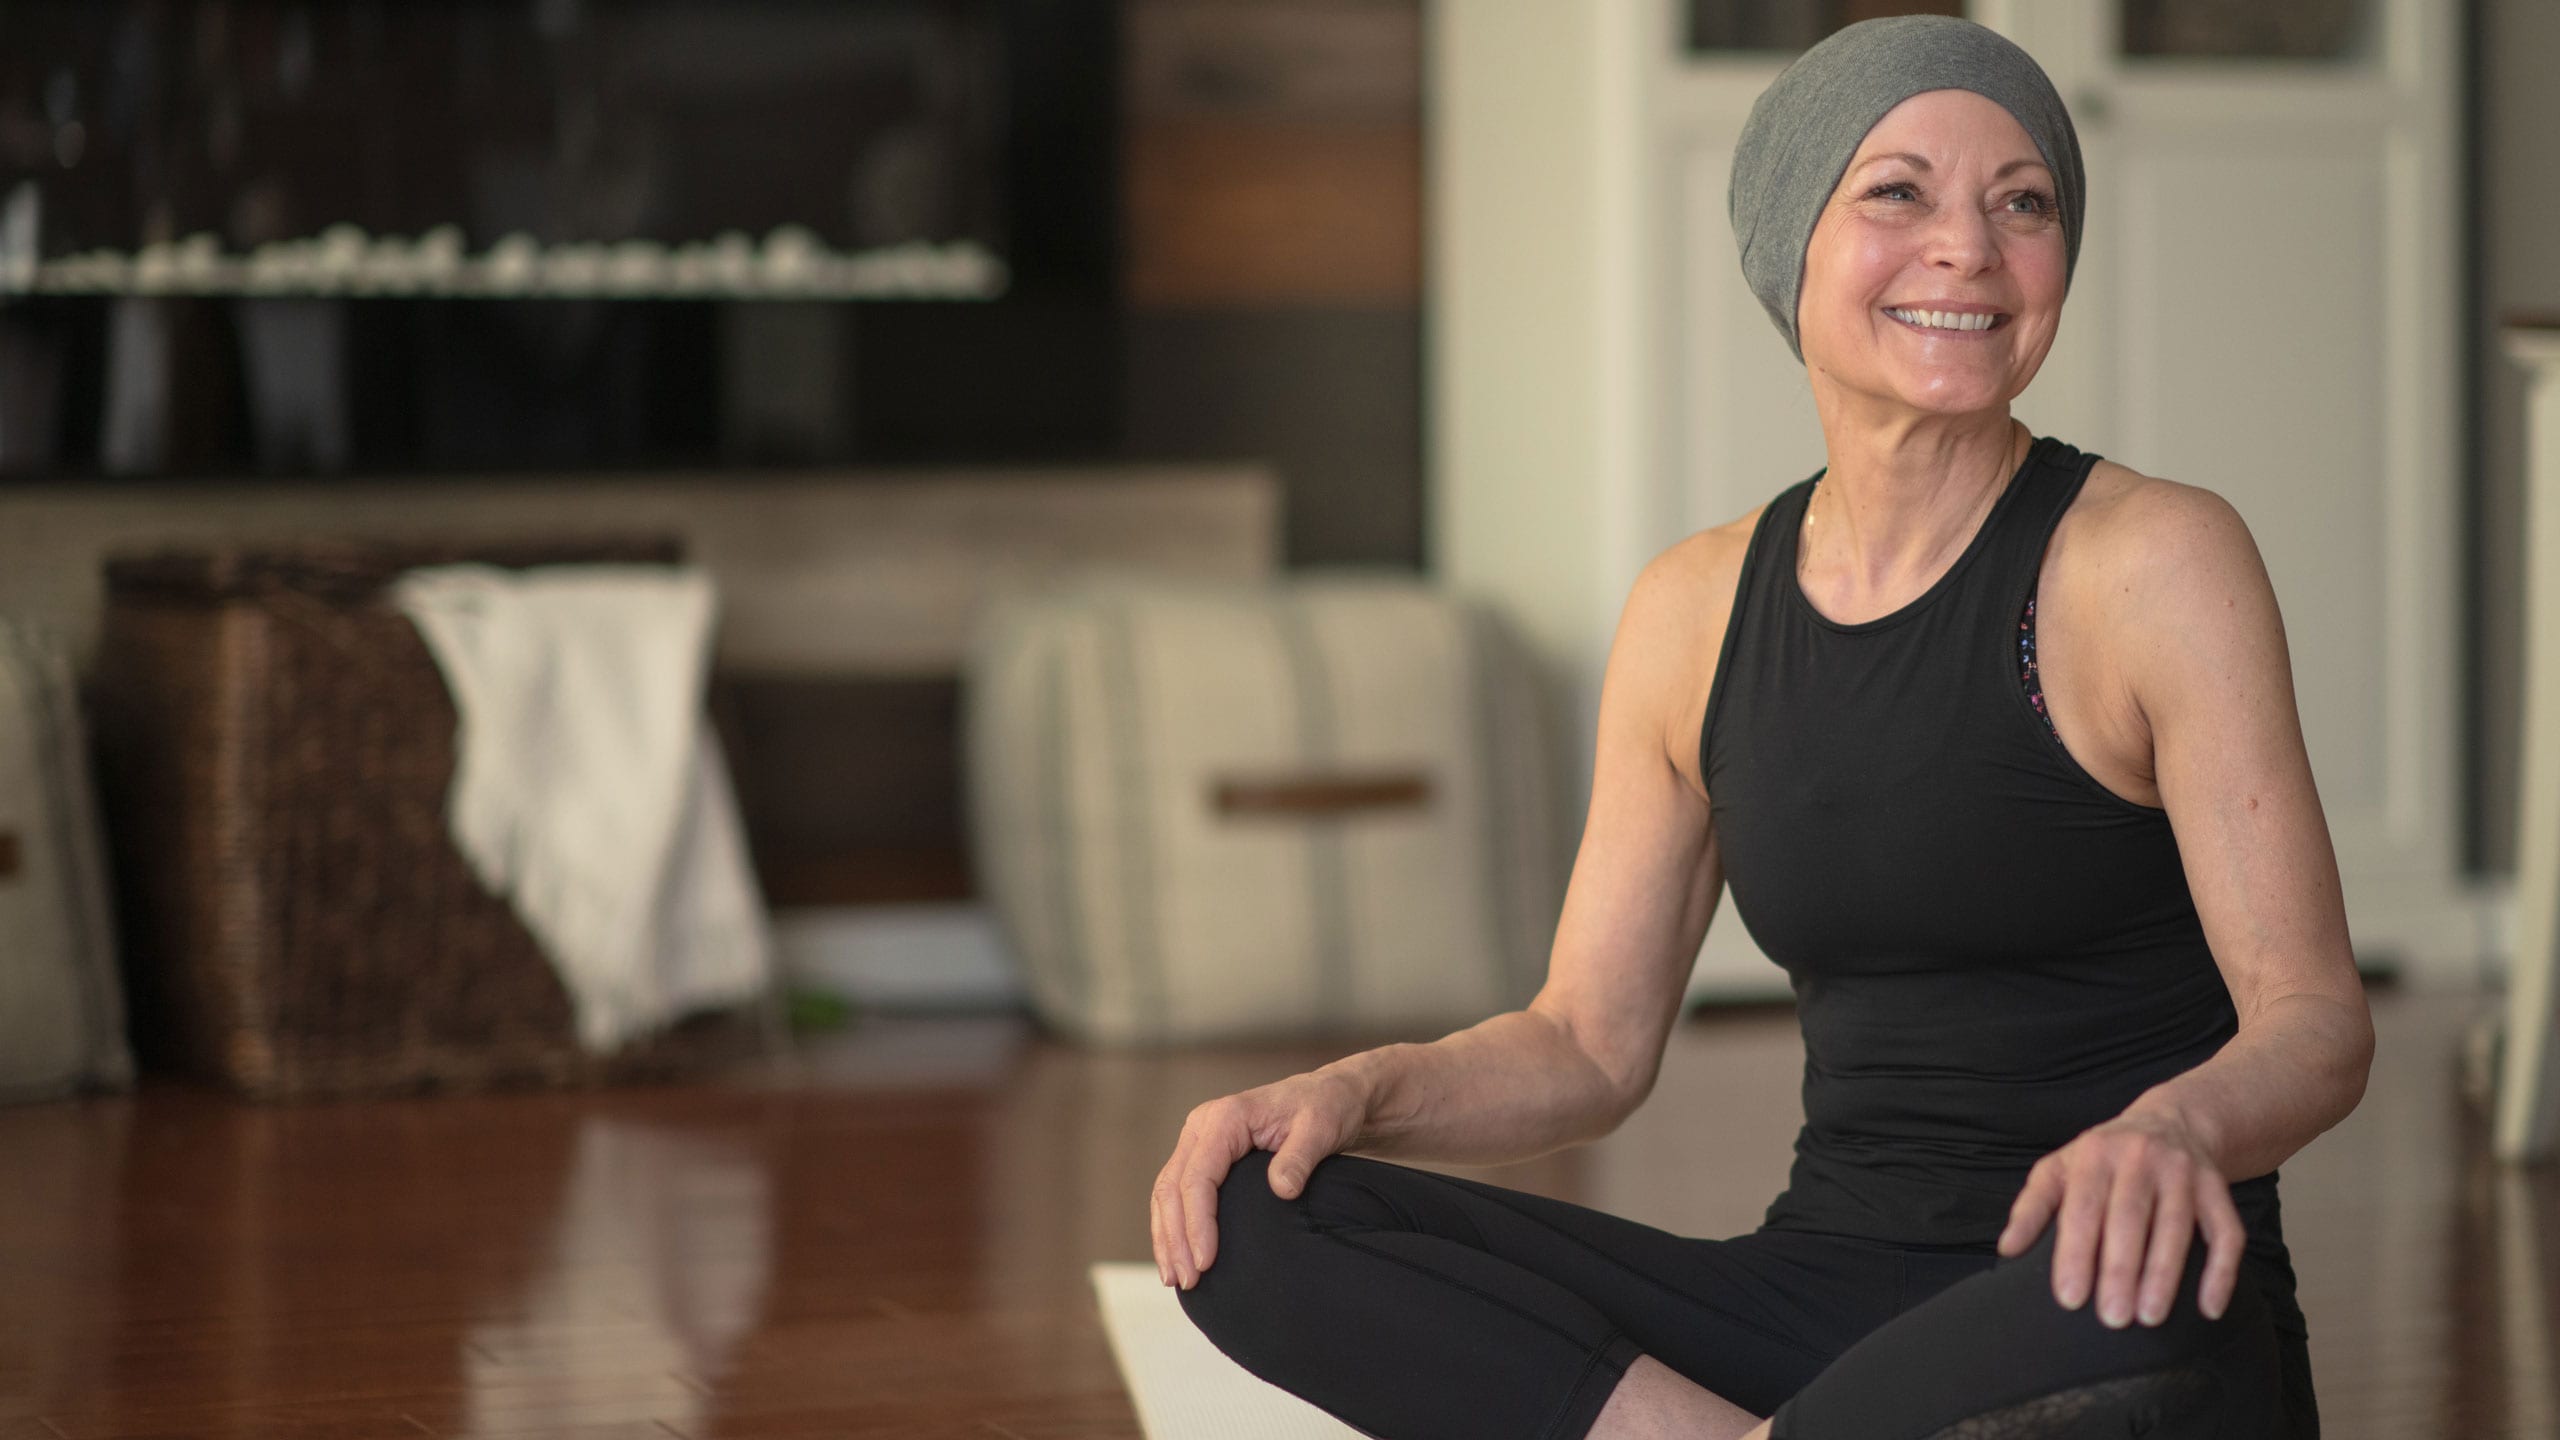 A cancer patient in yoga wear looking happy